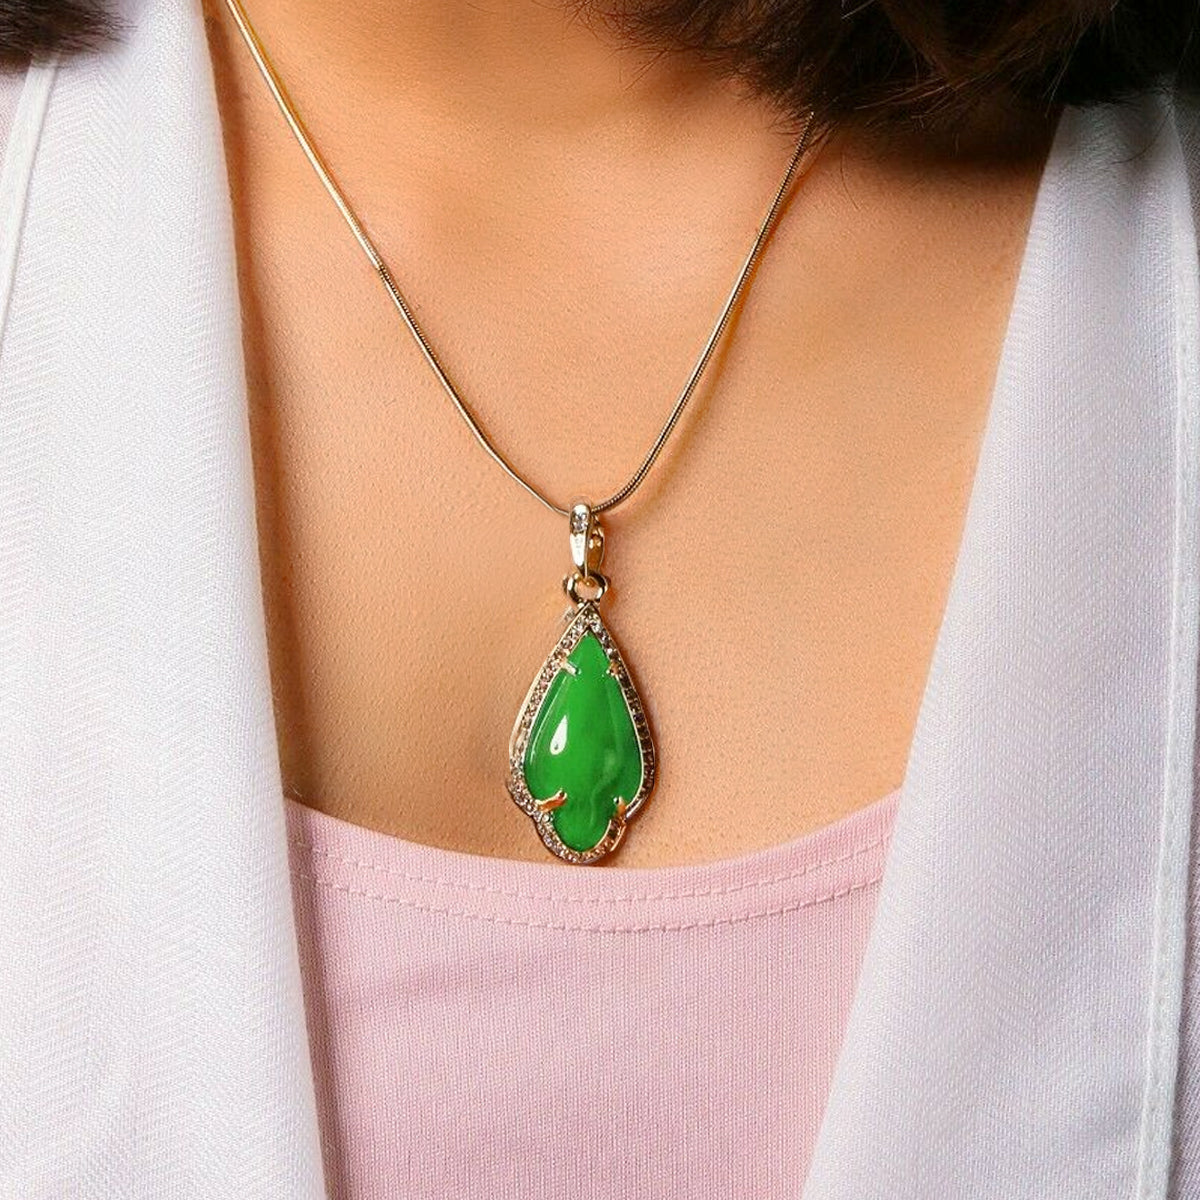 Green Women's Pendants 14K Gold Plated Lab Diamond Mounted Curved Tear Resin Jade High Fashion Jewelry Chain Pendant Necklaces